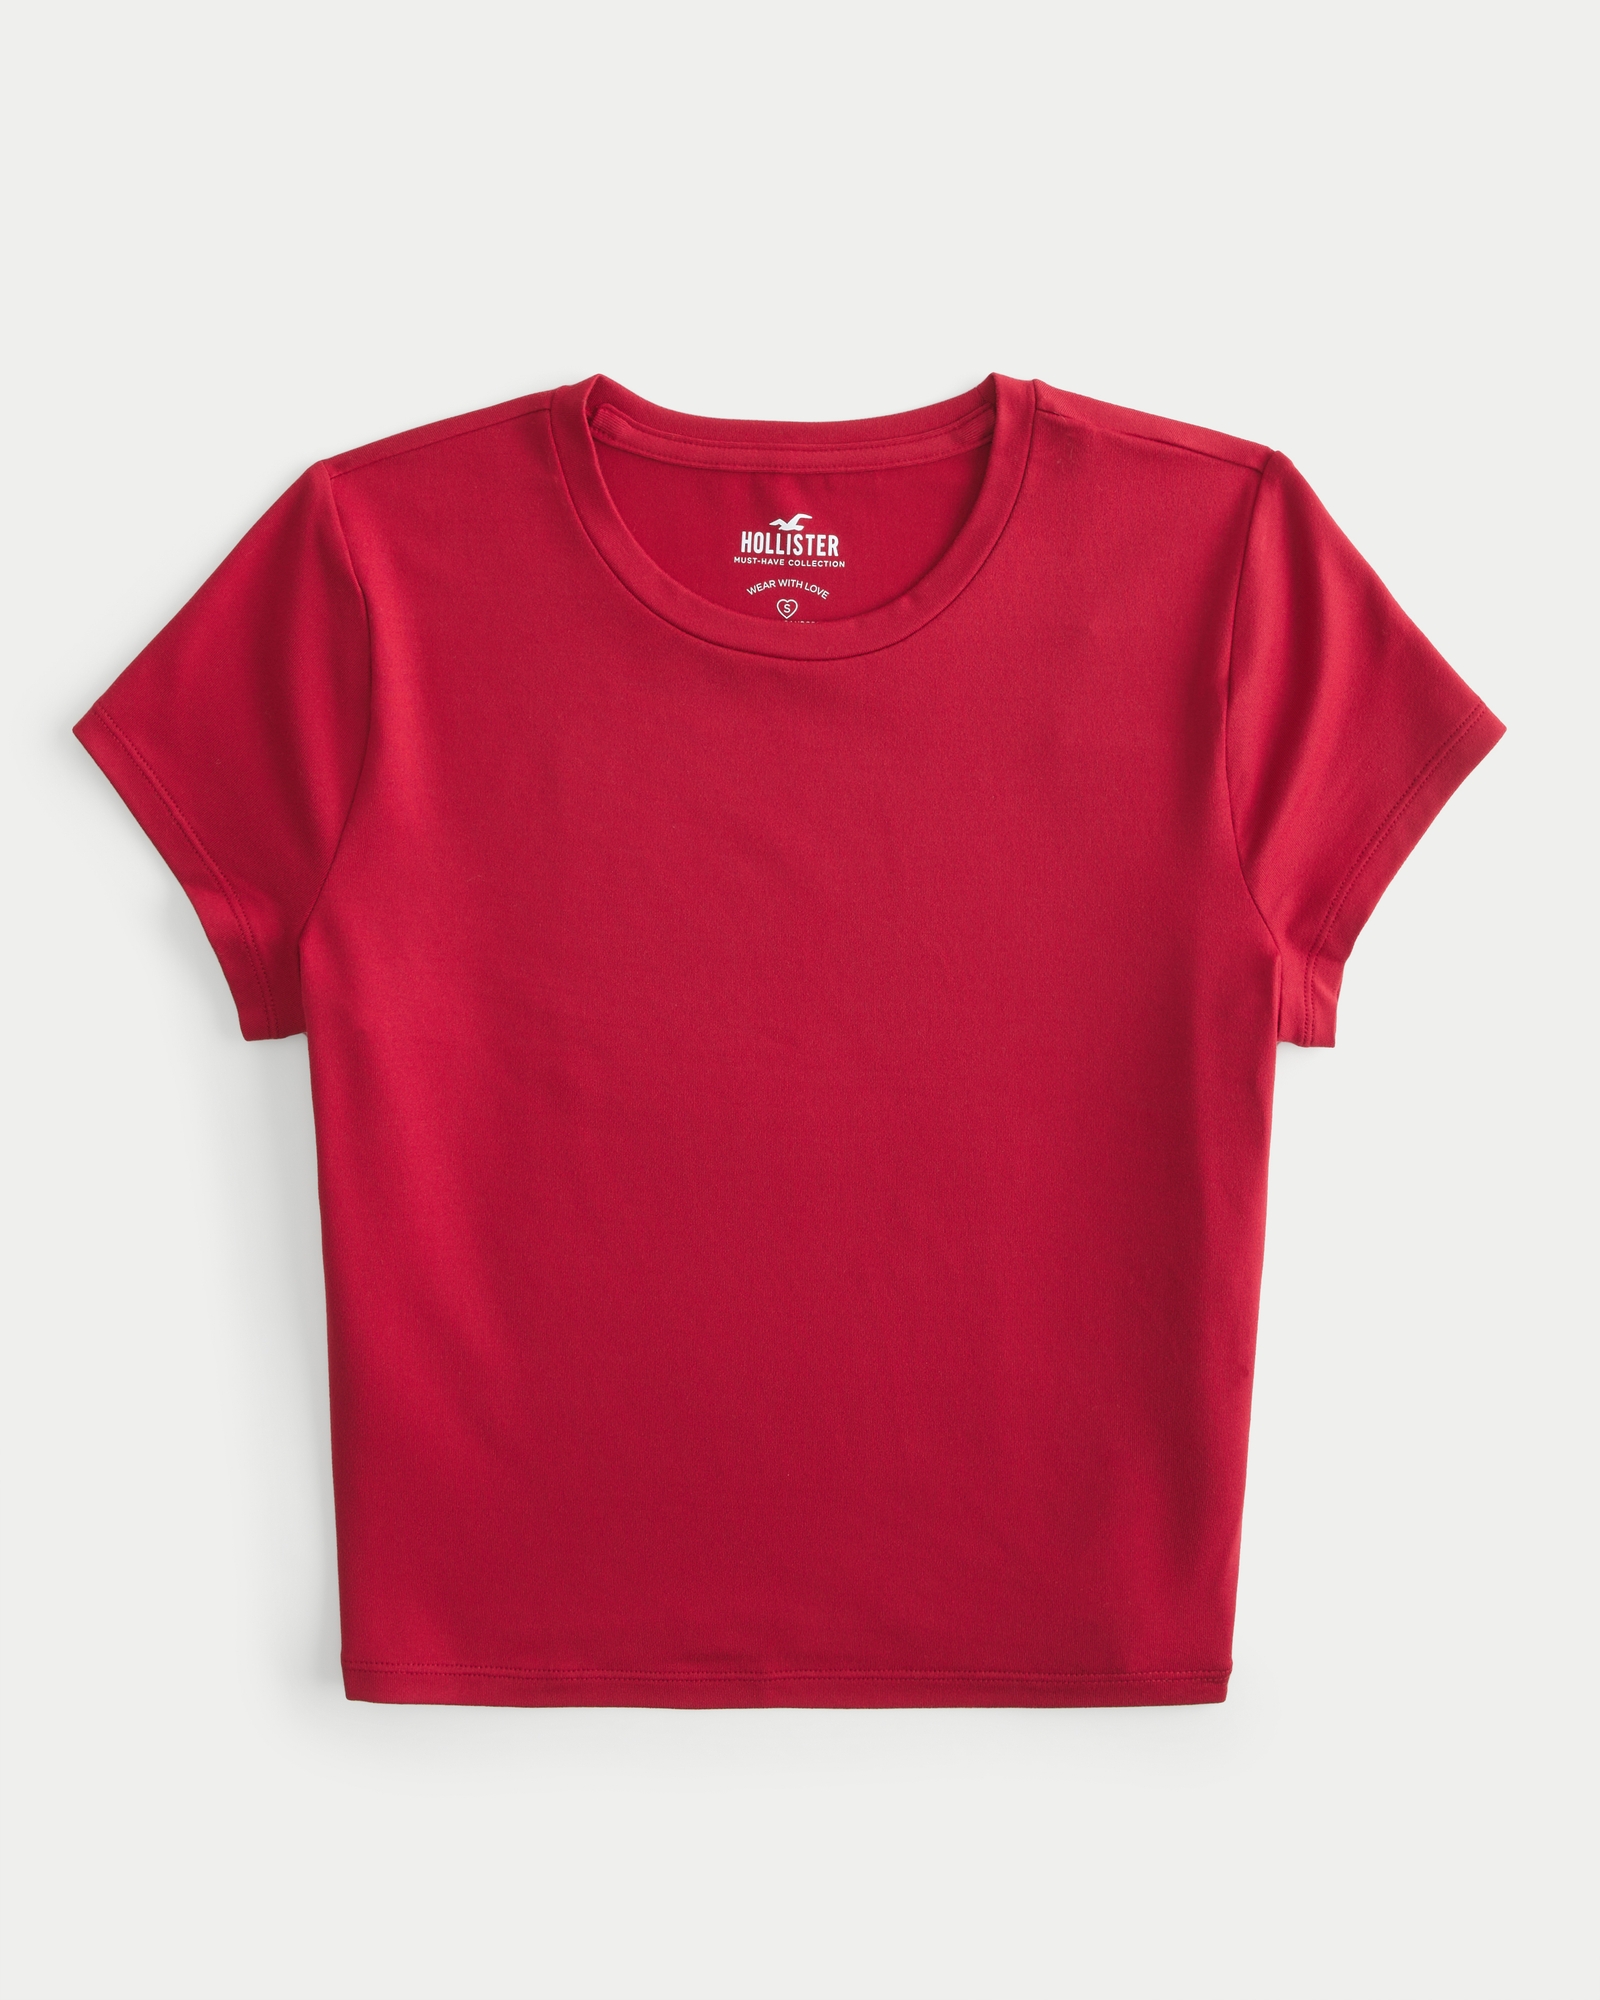 Hollister women RED Logo Graphic Easy Tee Slim T shirt Top Size Small